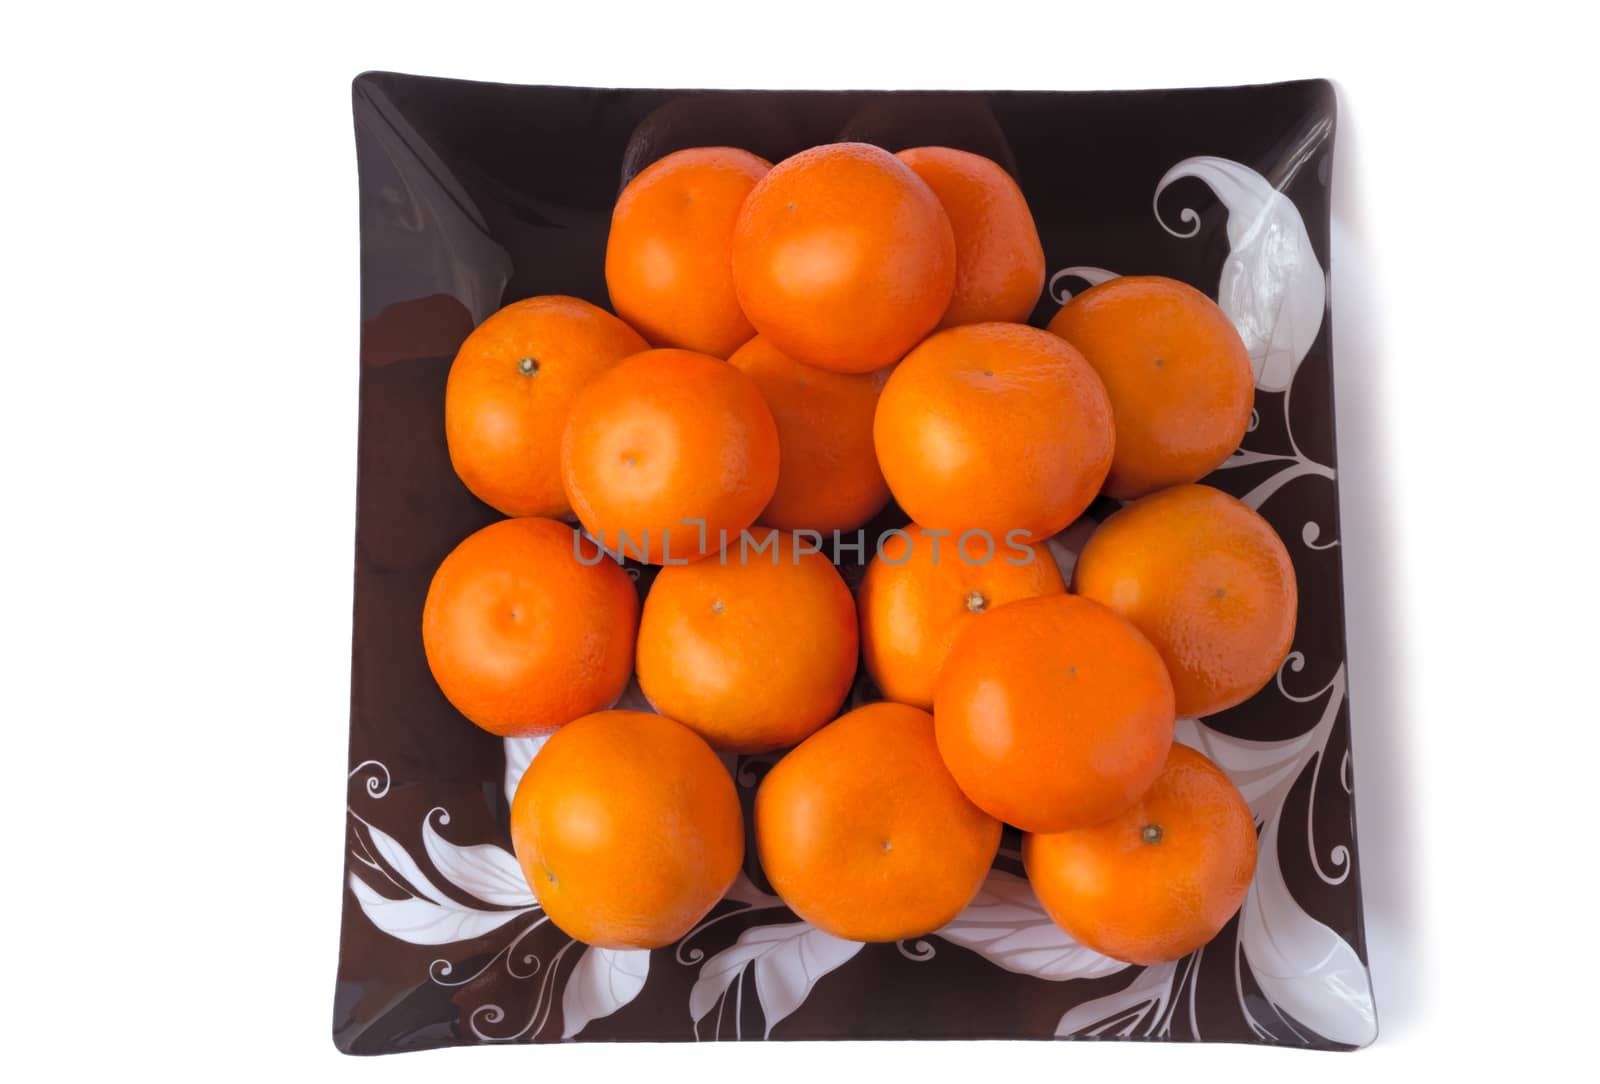 Large ripe tangerines in a glass dish on a white background. by georgina198